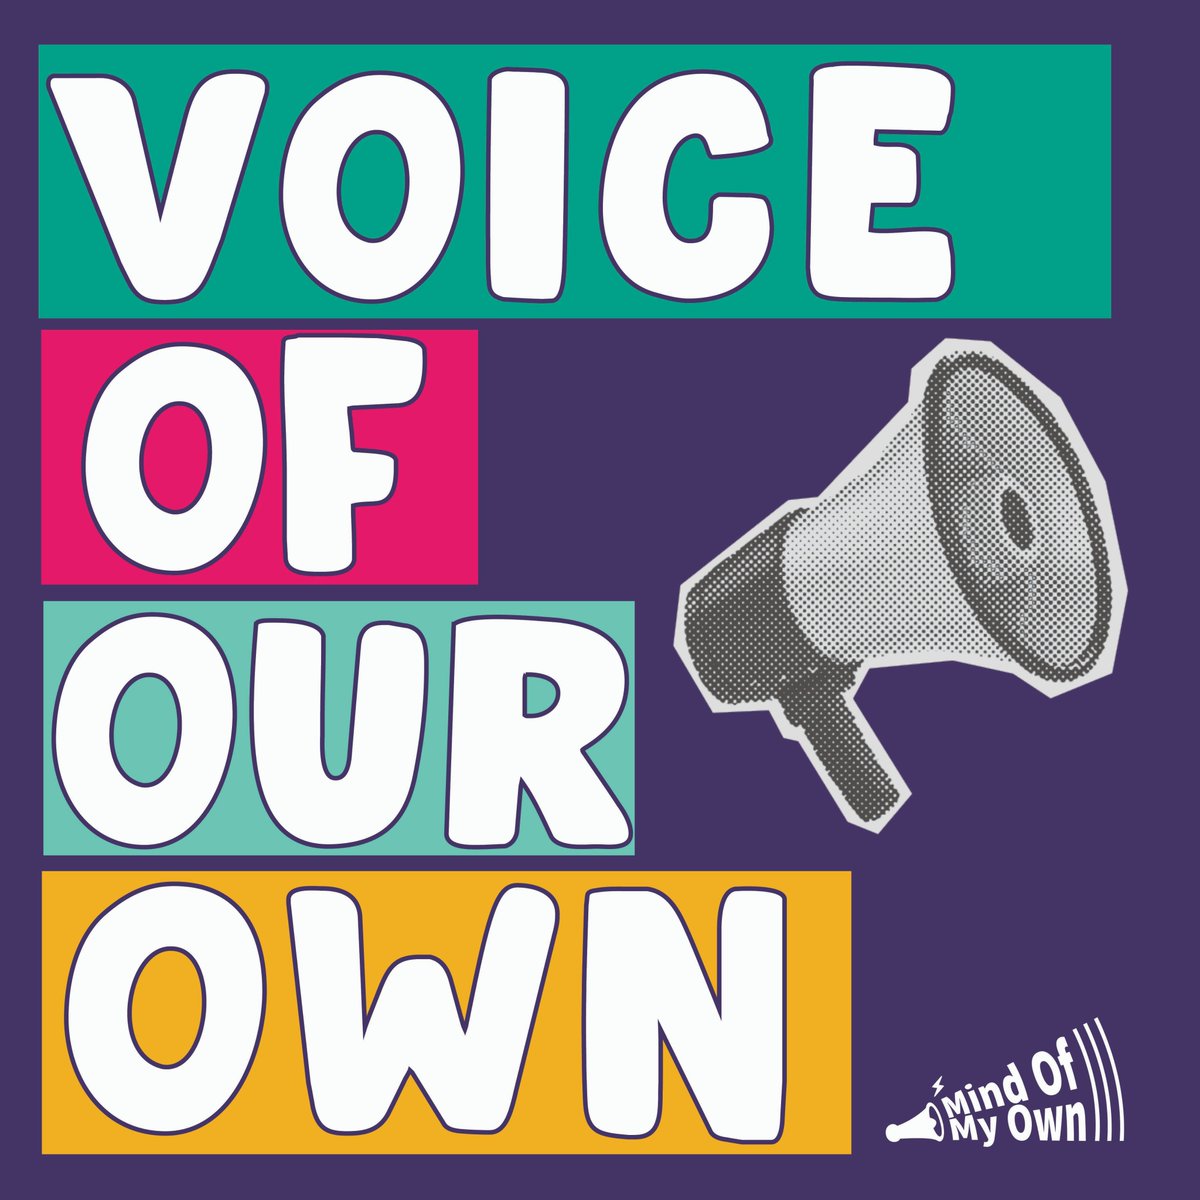 🎉We have an exciting new project 🎉 📣 Voice Of Our Own a new way for young people to join the #MindOfMyOwn community to help shape our apps with their experiences and ideas. If you have young people who you think would make brilliant young advisors email or DM us!